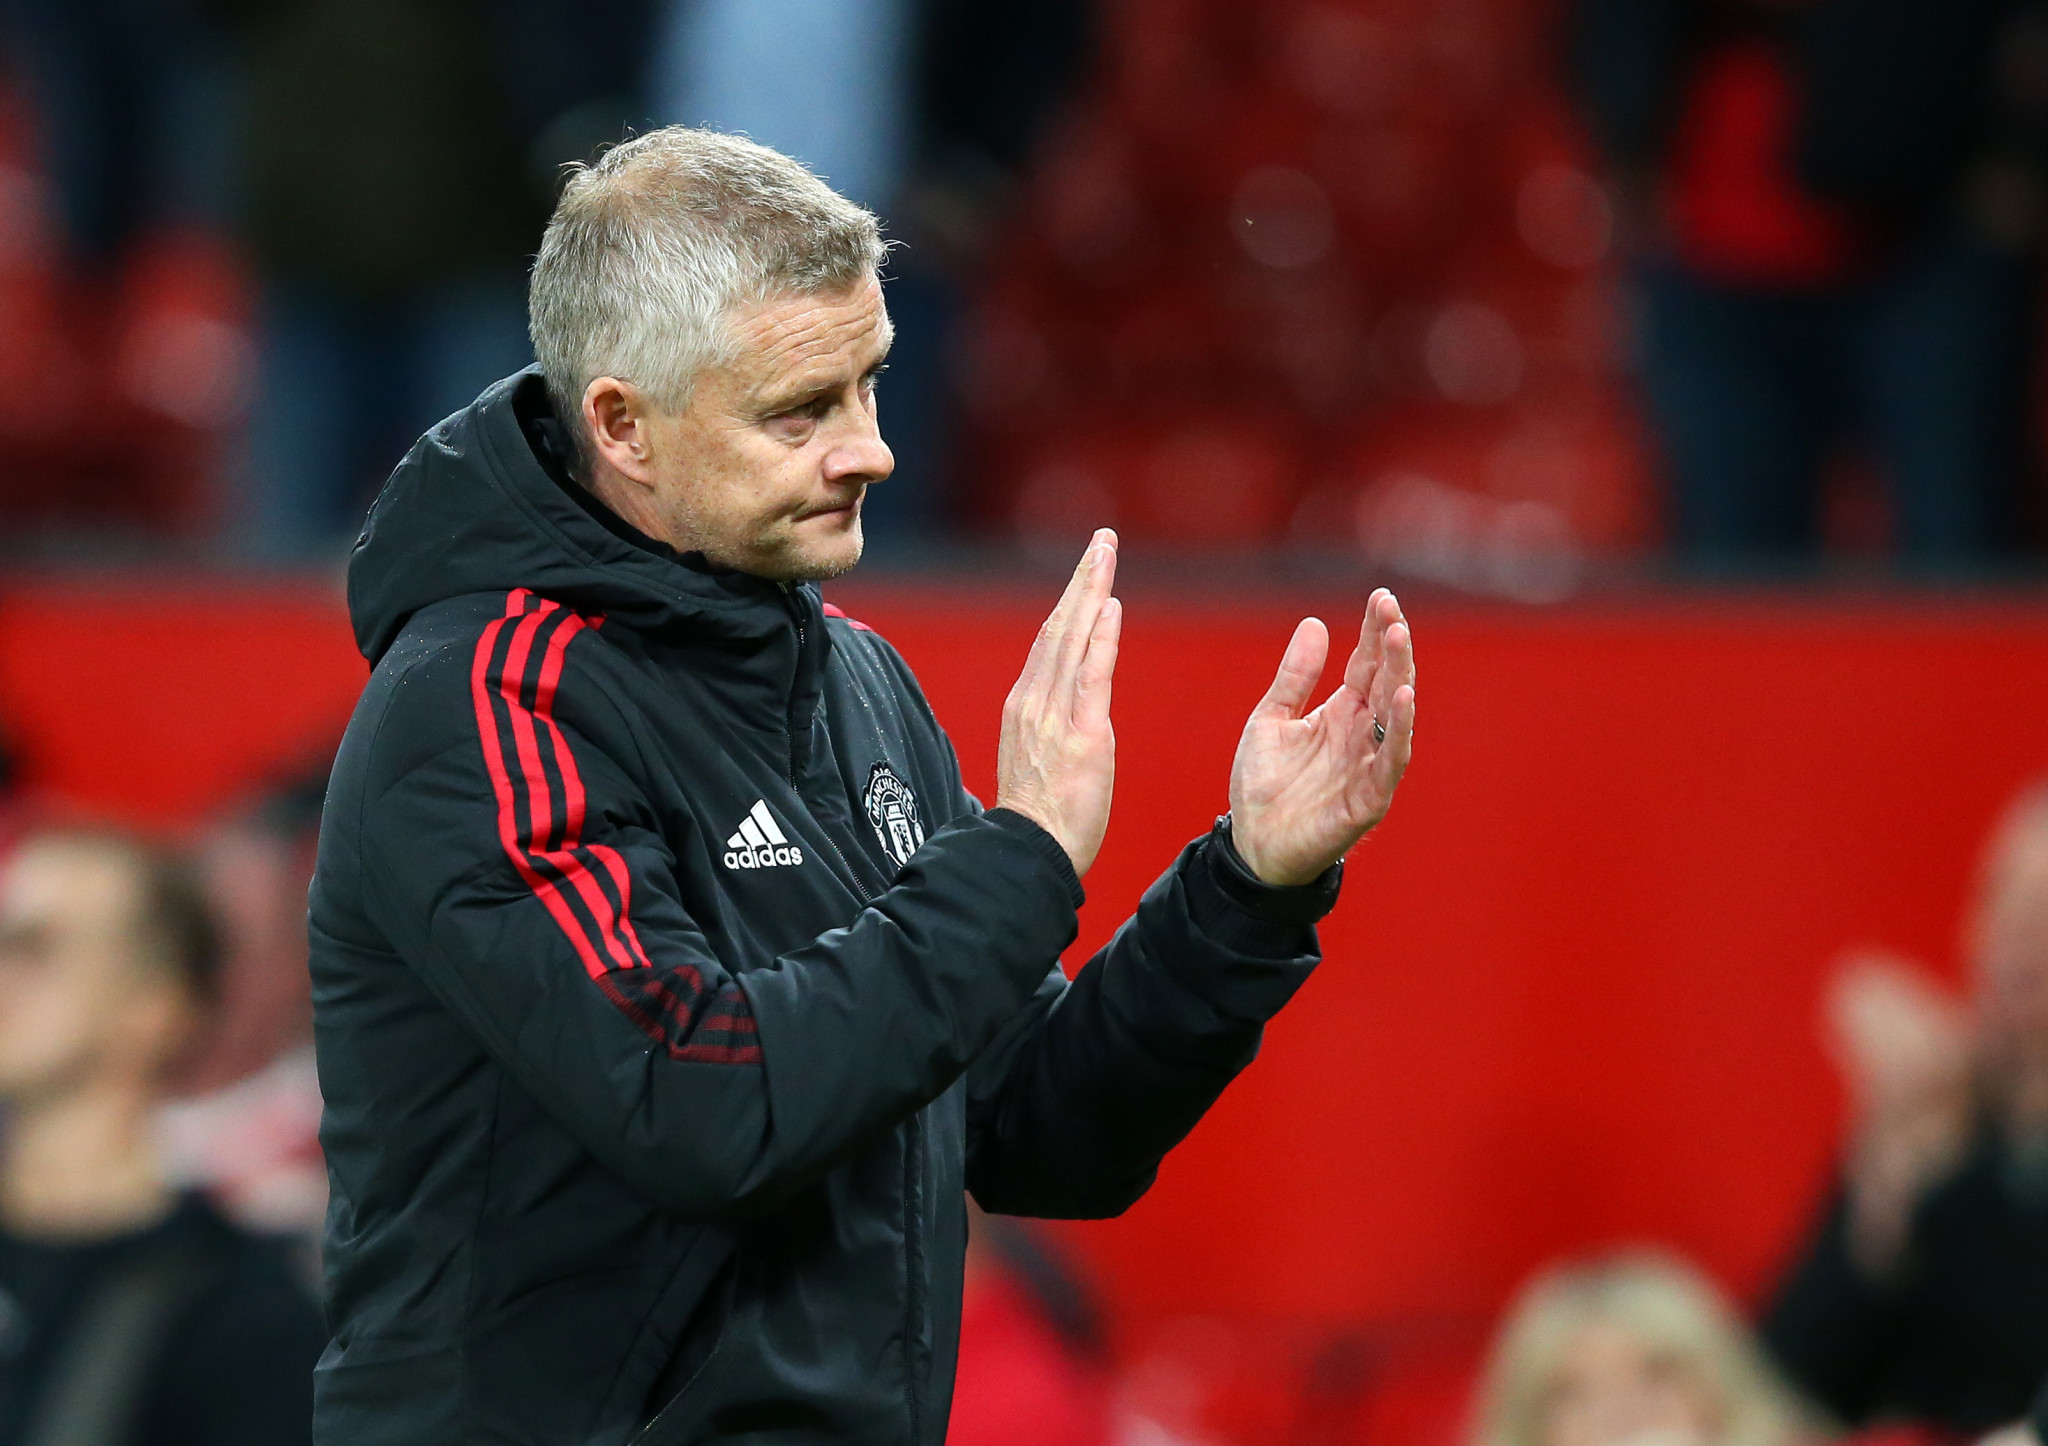 Manchester United manager Ole Gunnar Solskjær is under extreme pressure as calls for him to be sacked grow ©Getty Images